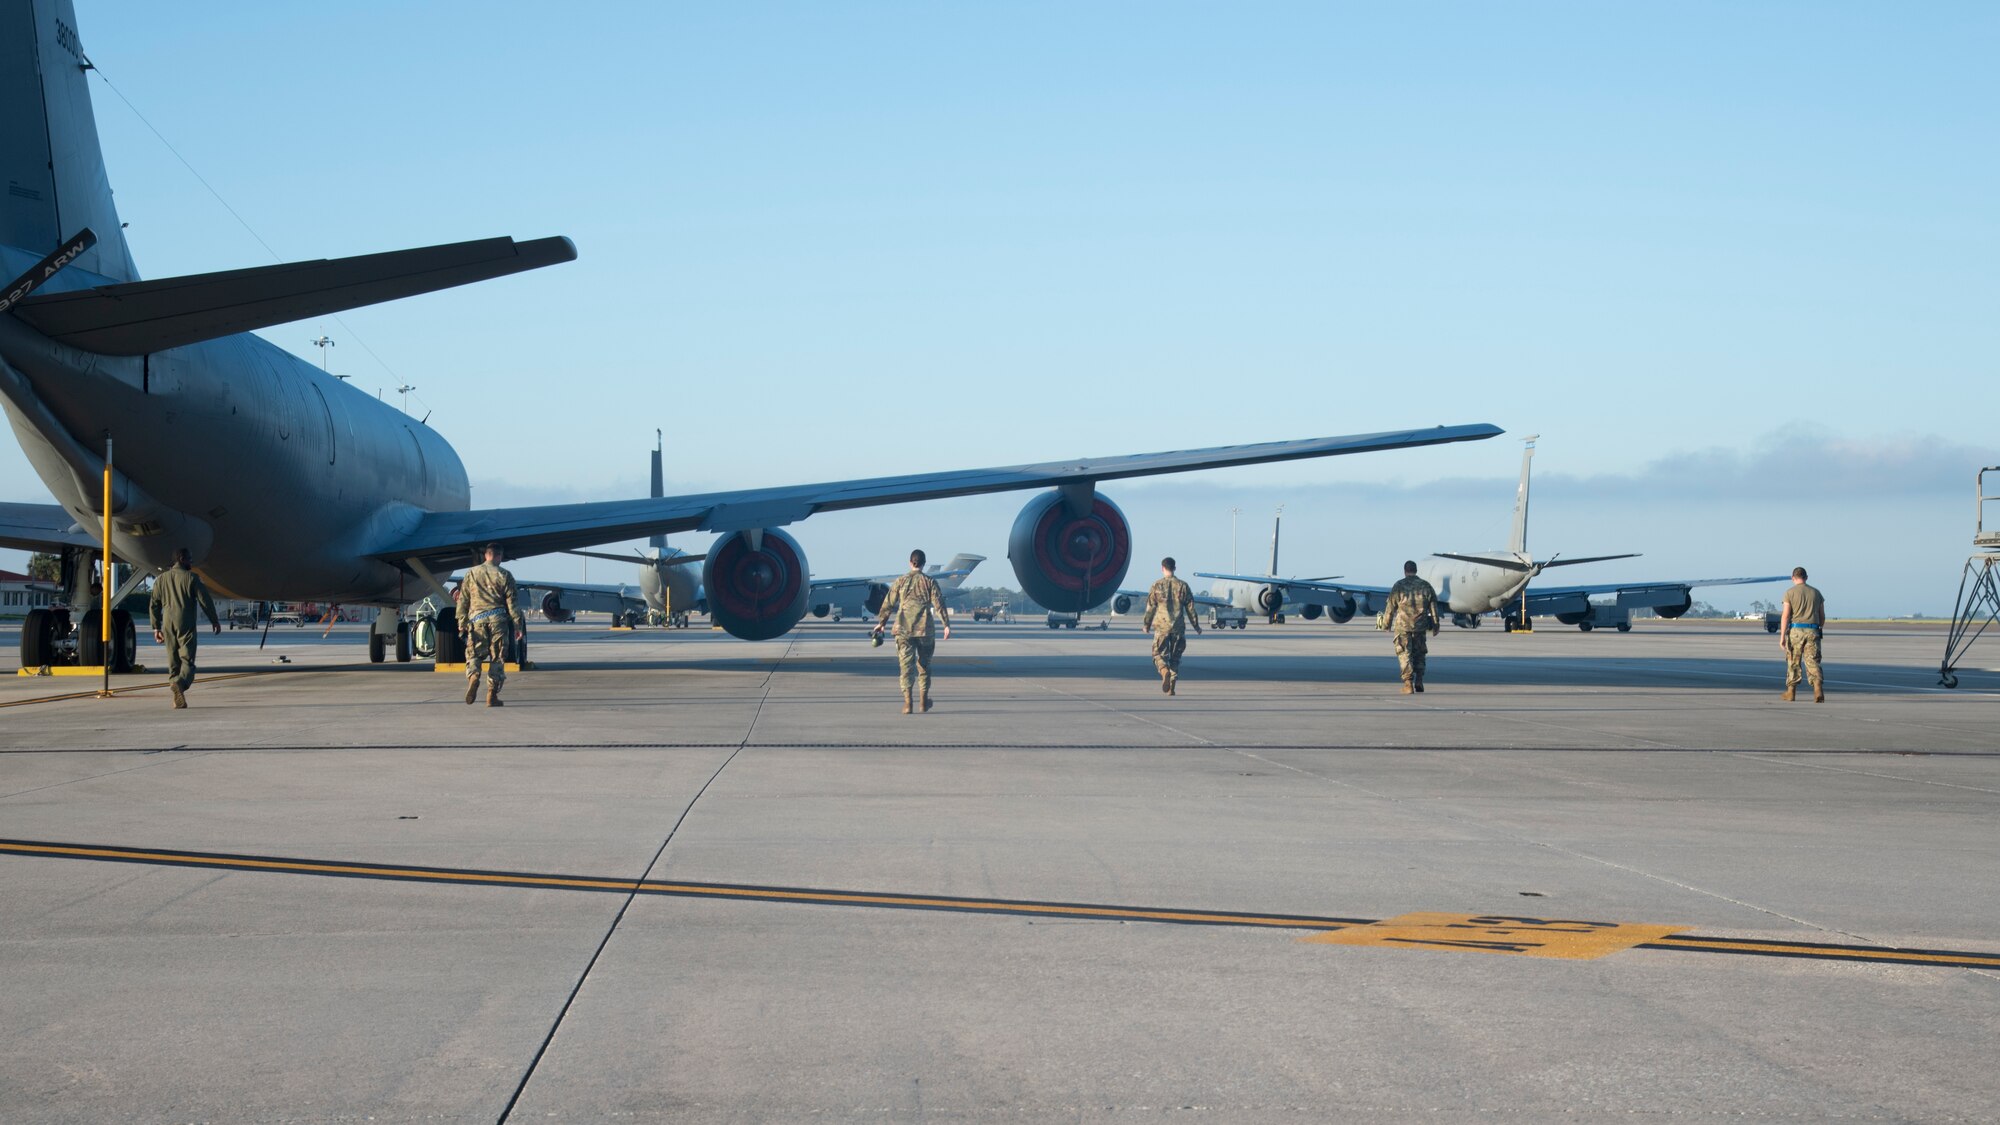 Team MacDill Airmen conduct a foreign object and debris (FOD) walk on the flight line at MacDill Air Force Base, Fla., Nov. 13, 2020, following Tropical Storm Eta.